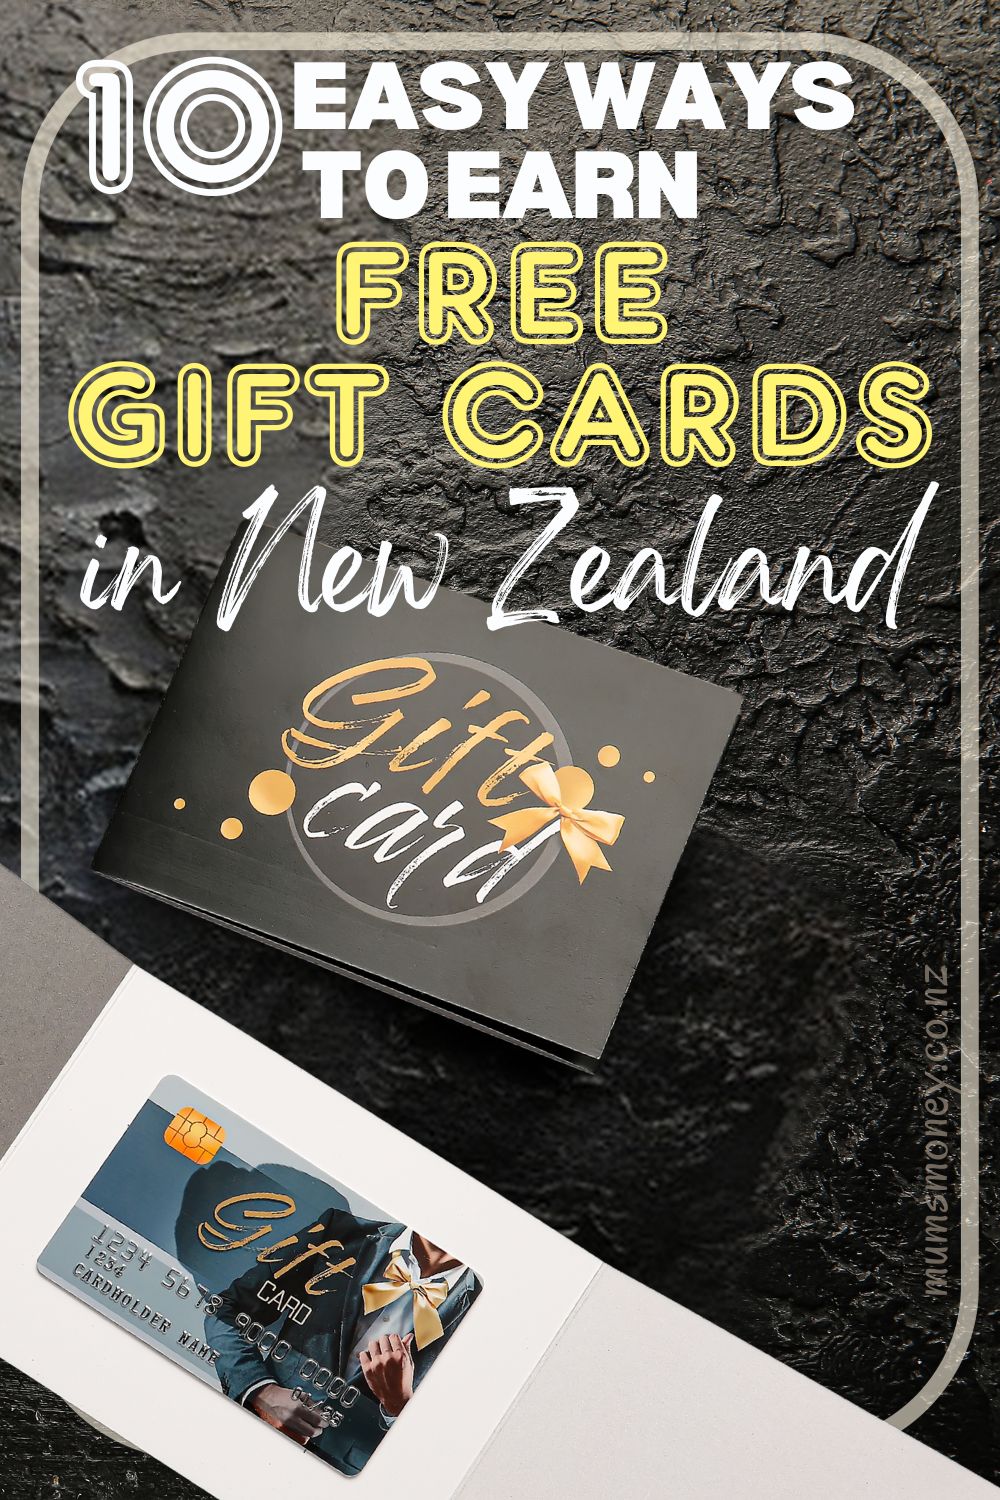  Easy Ways to Earn Free Gift Cards in New Zealand